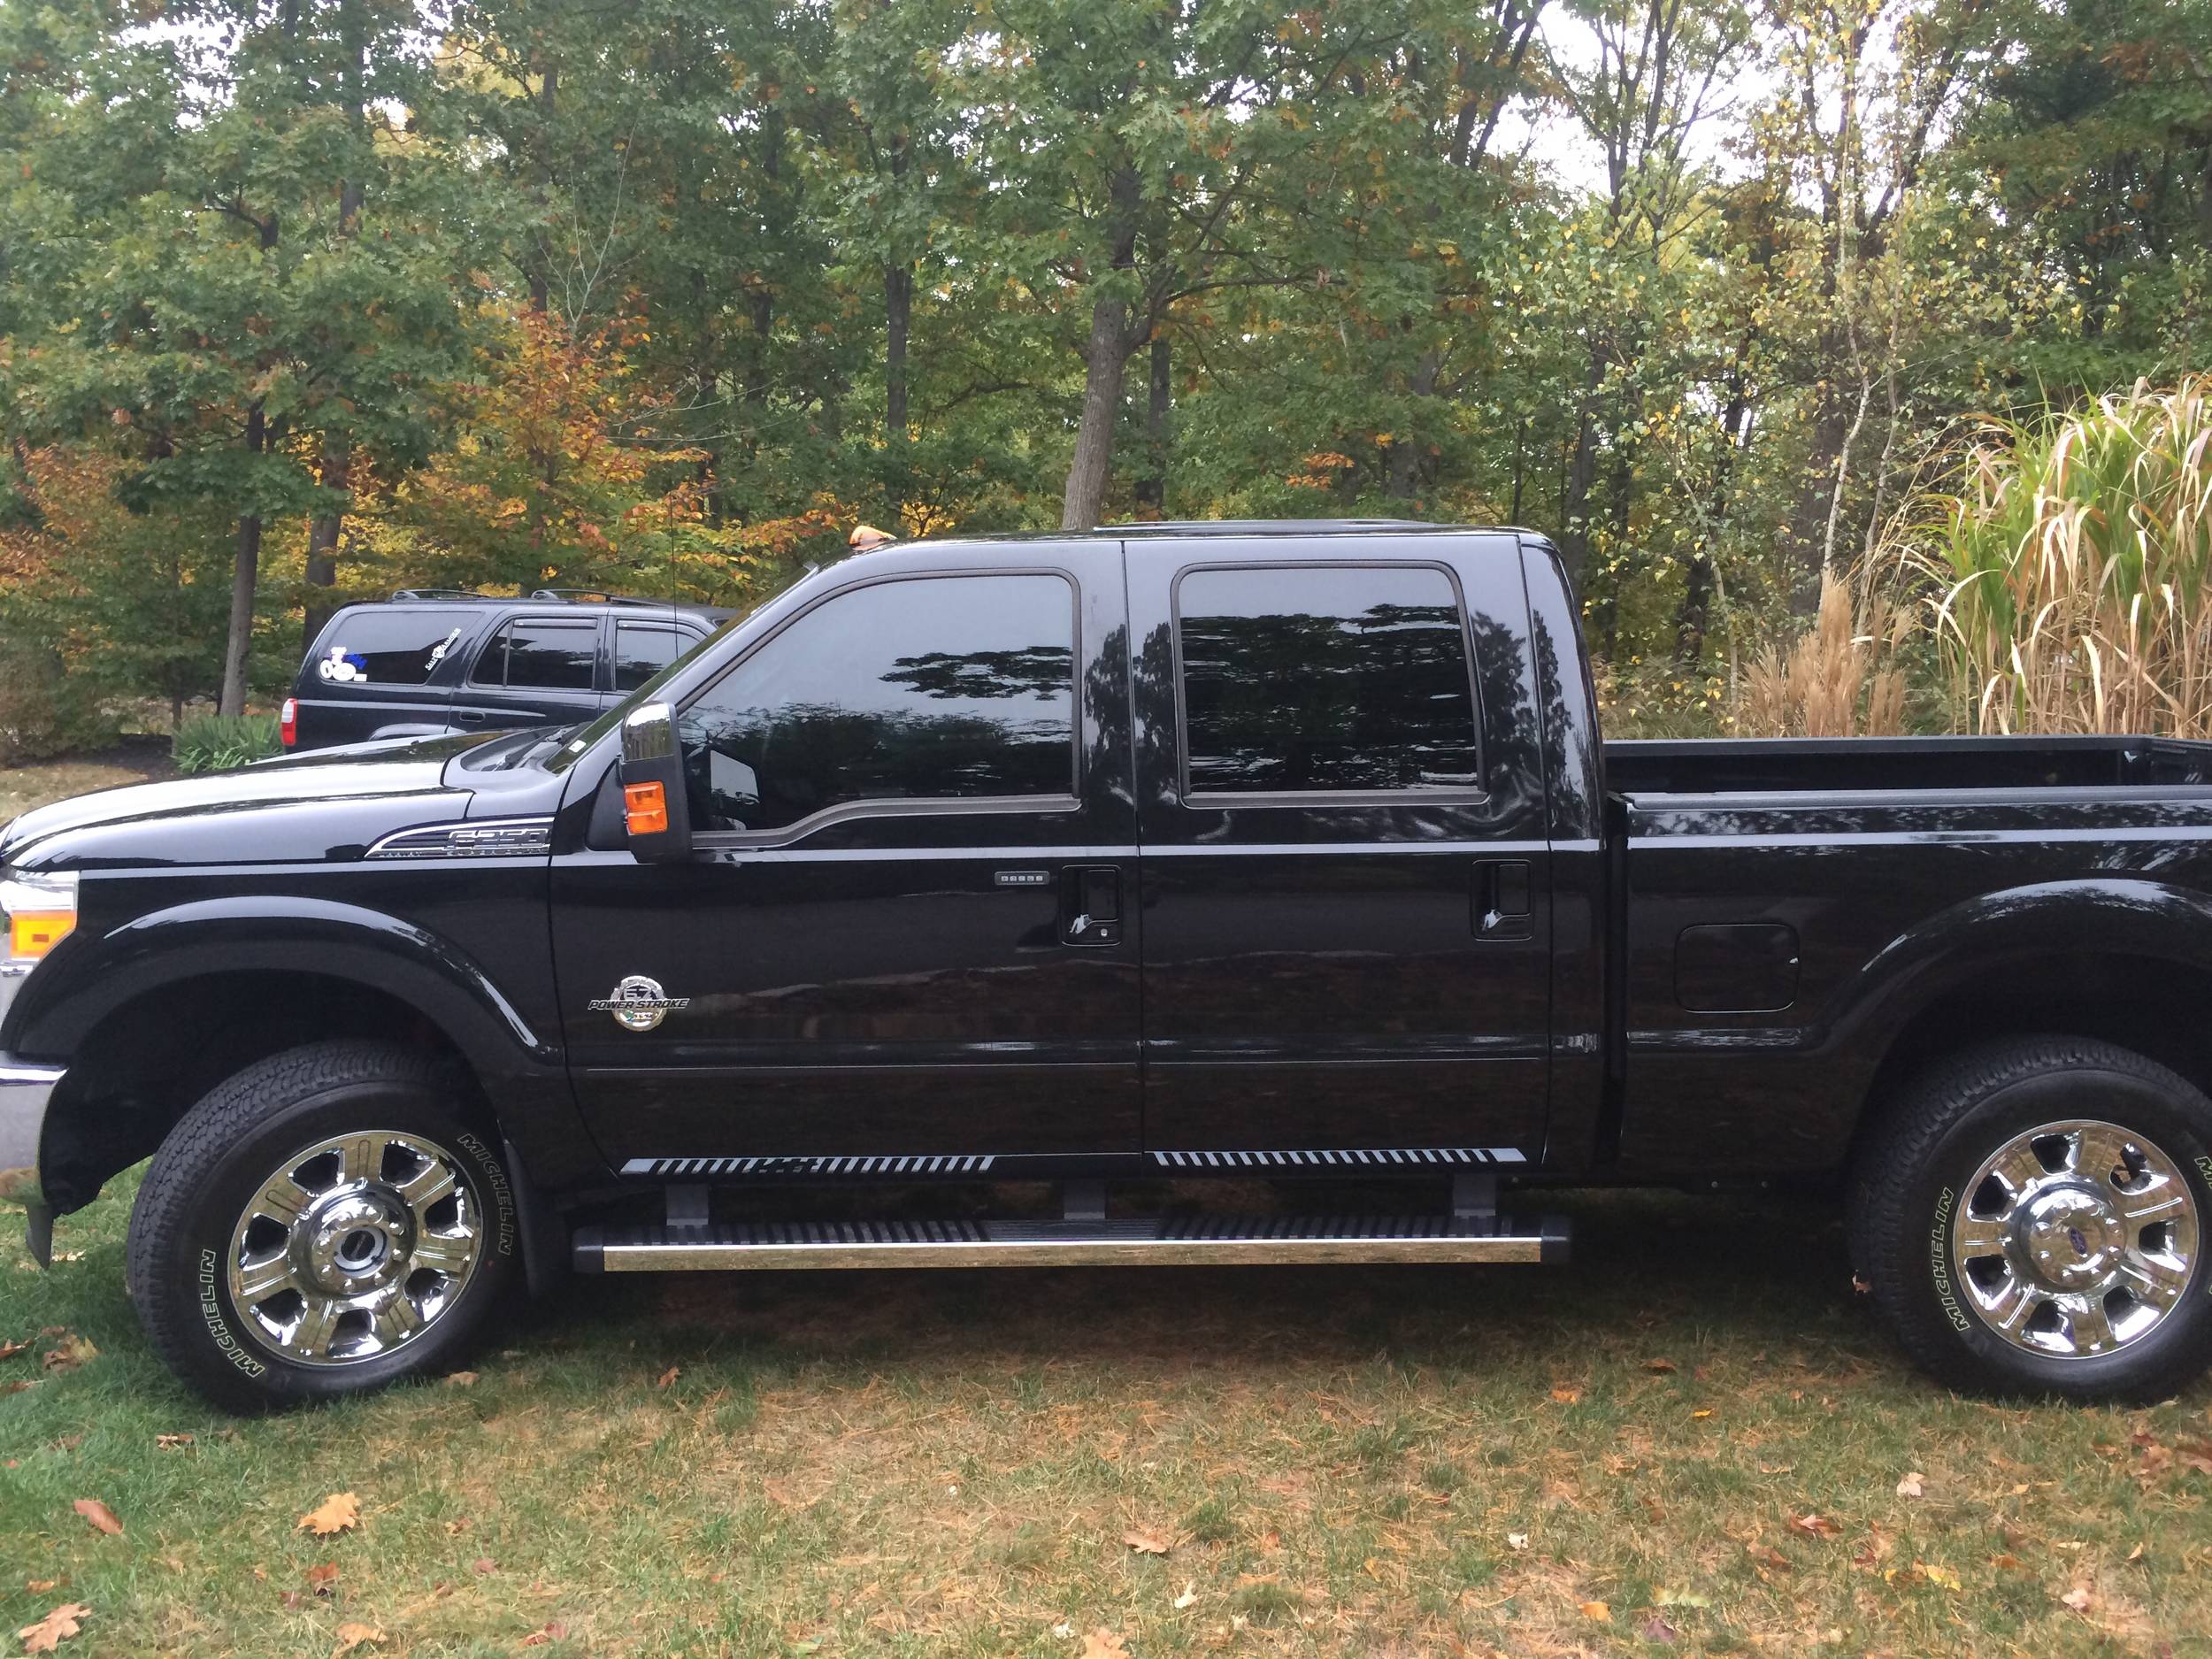 2014 F-250 Powerstroke CCSB Lariat Ultimate Package